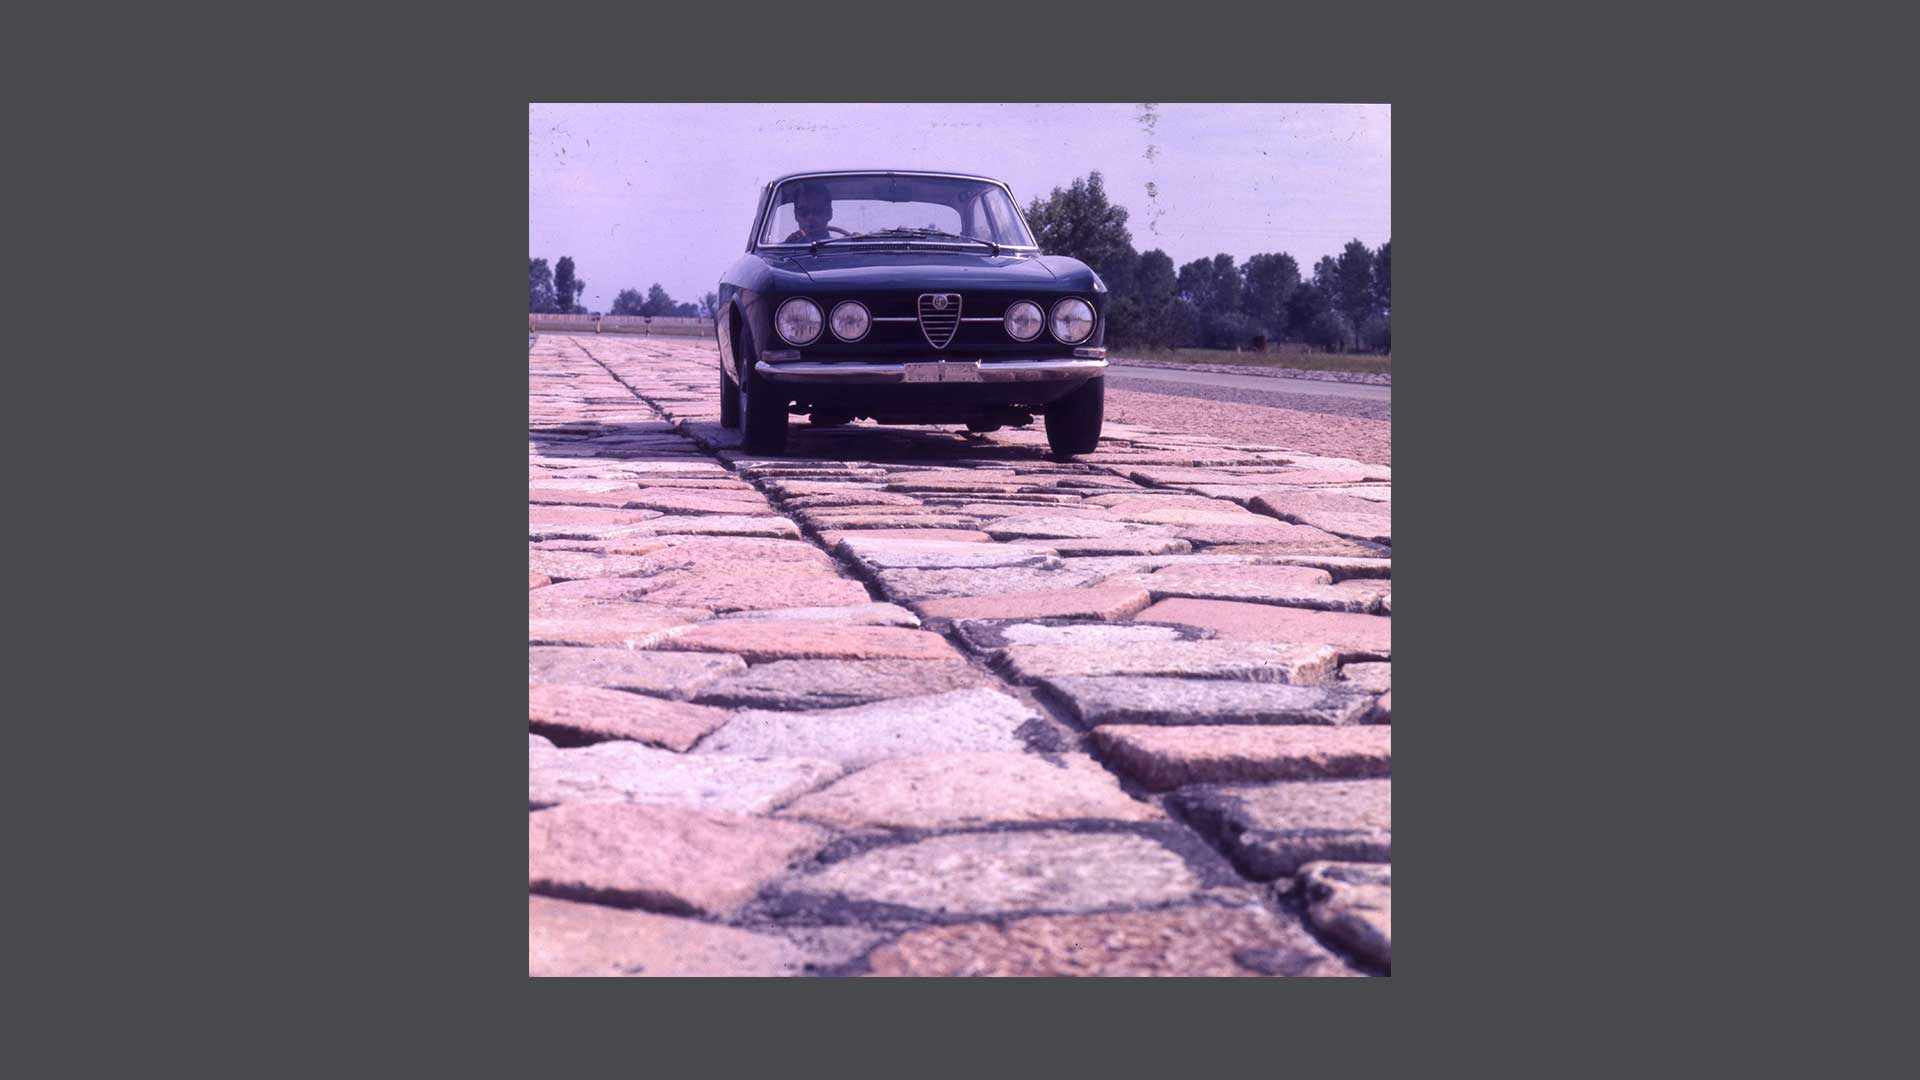 Historic photo of a car on paved ground